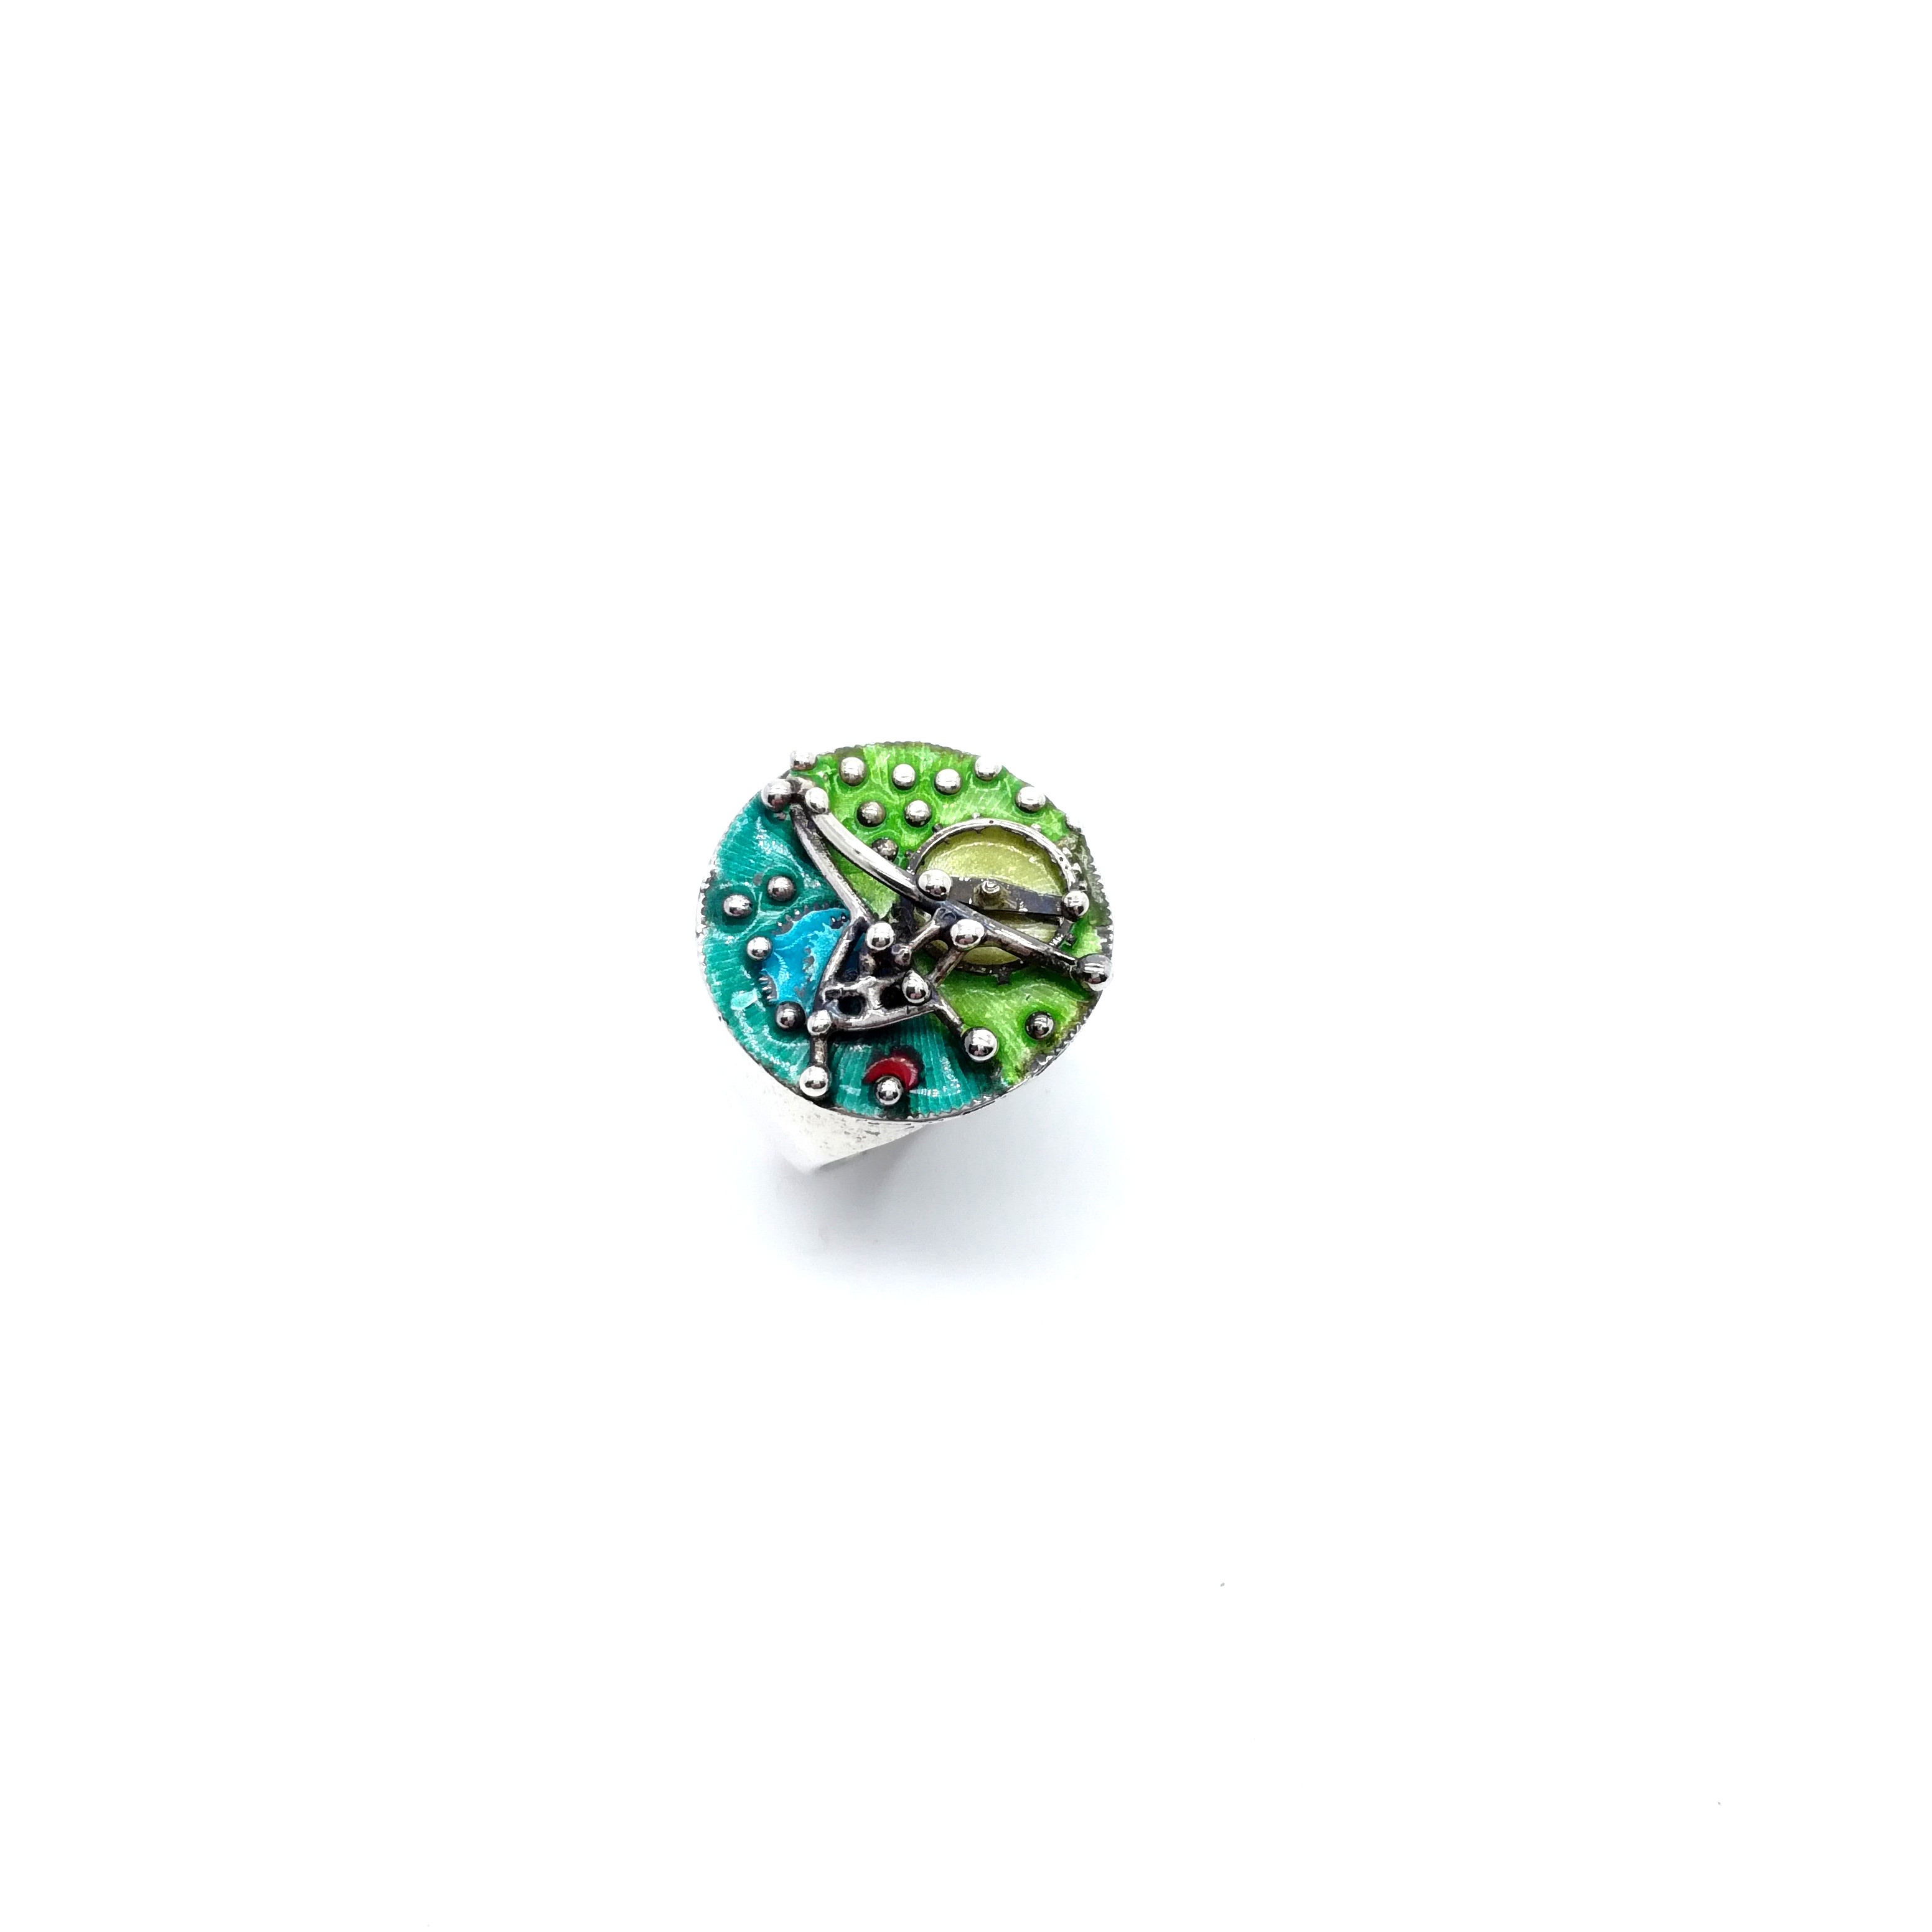 Silver ring 925 enameled with light blue and light green colors